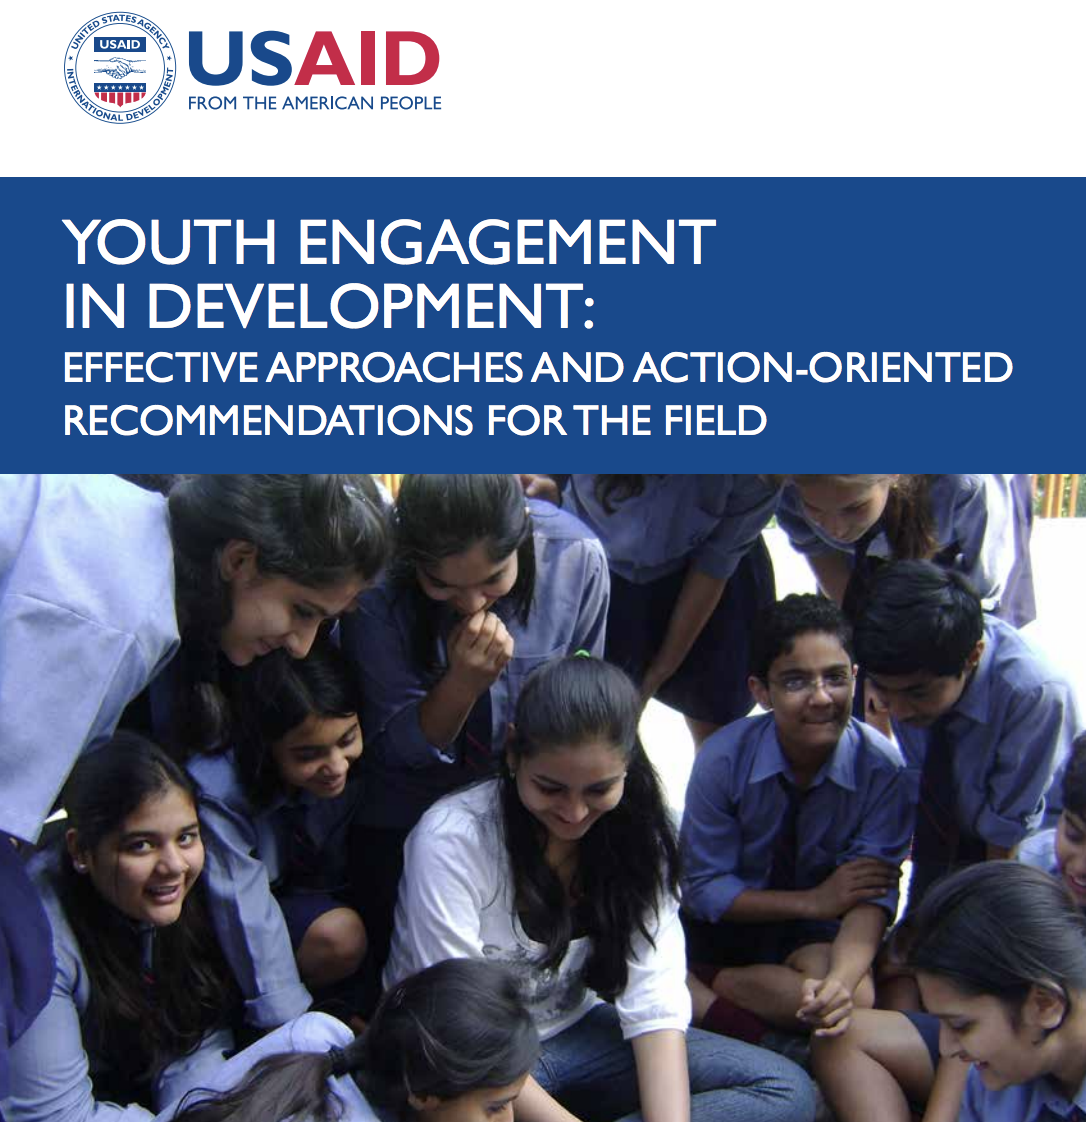 Youth Engagement in Development: Effective Approaches and Action-Oriented Recommendations for the Field